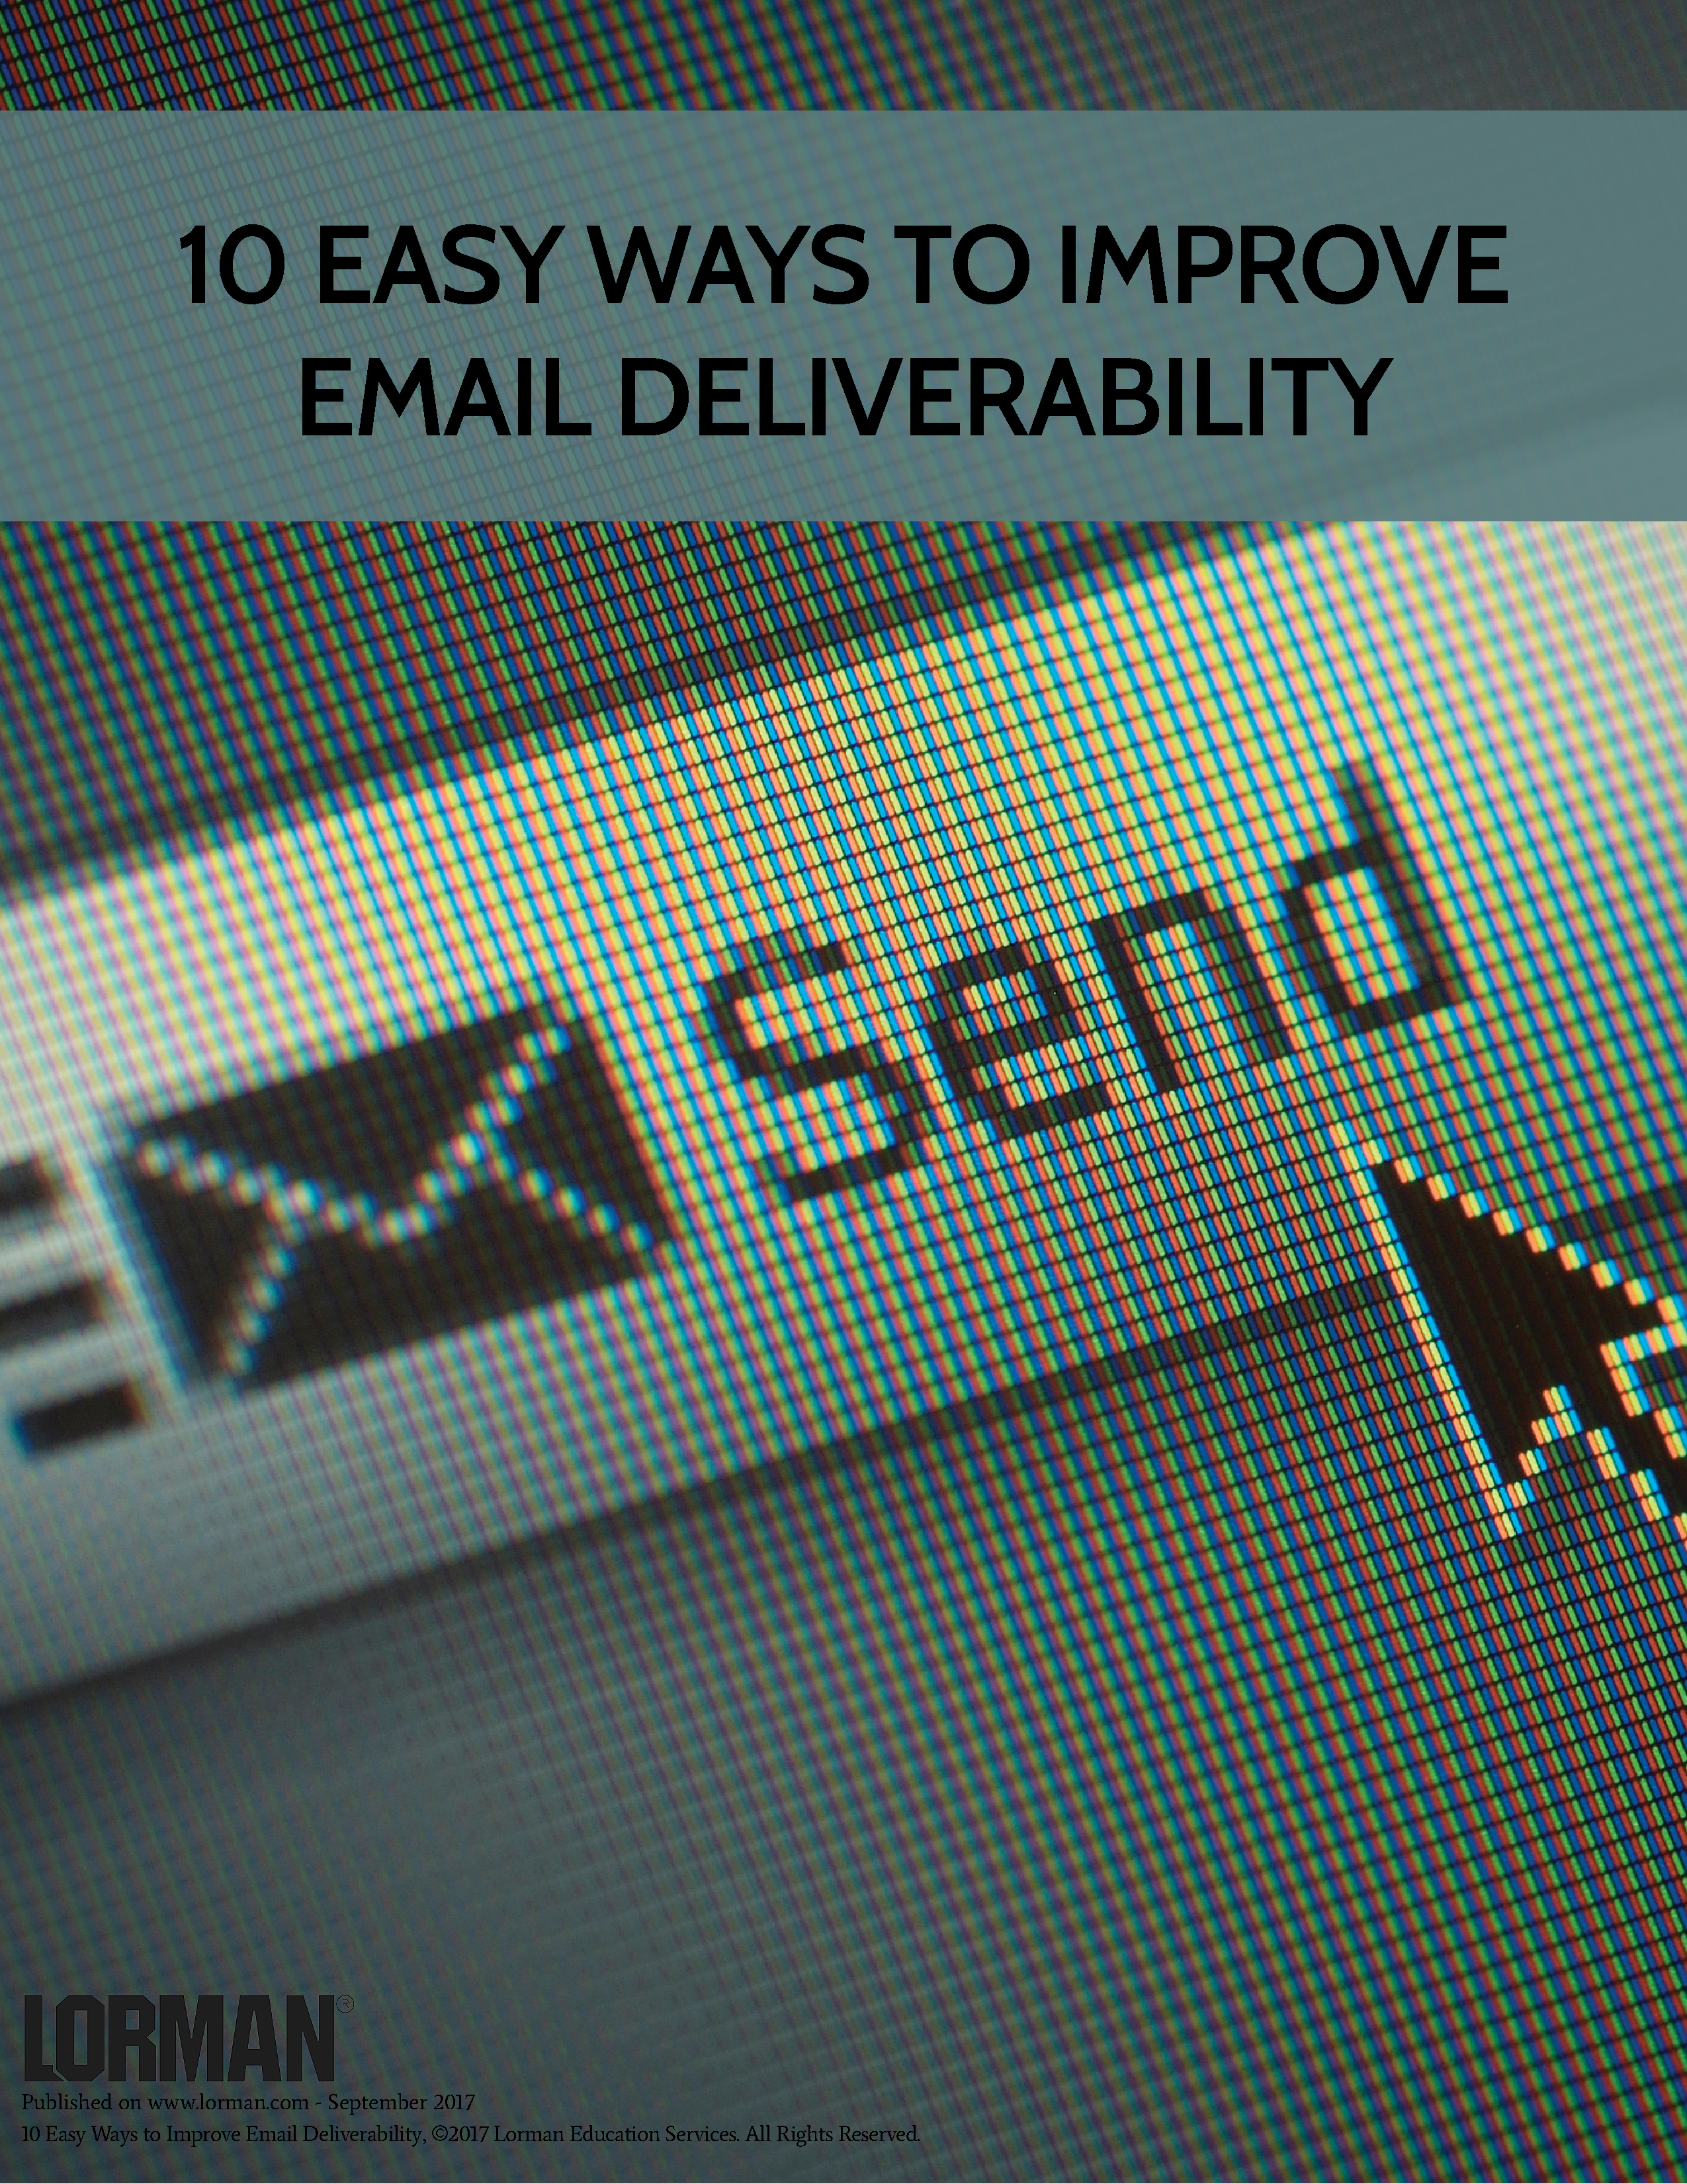 10 Easy Ways to Improve Email Deliverability